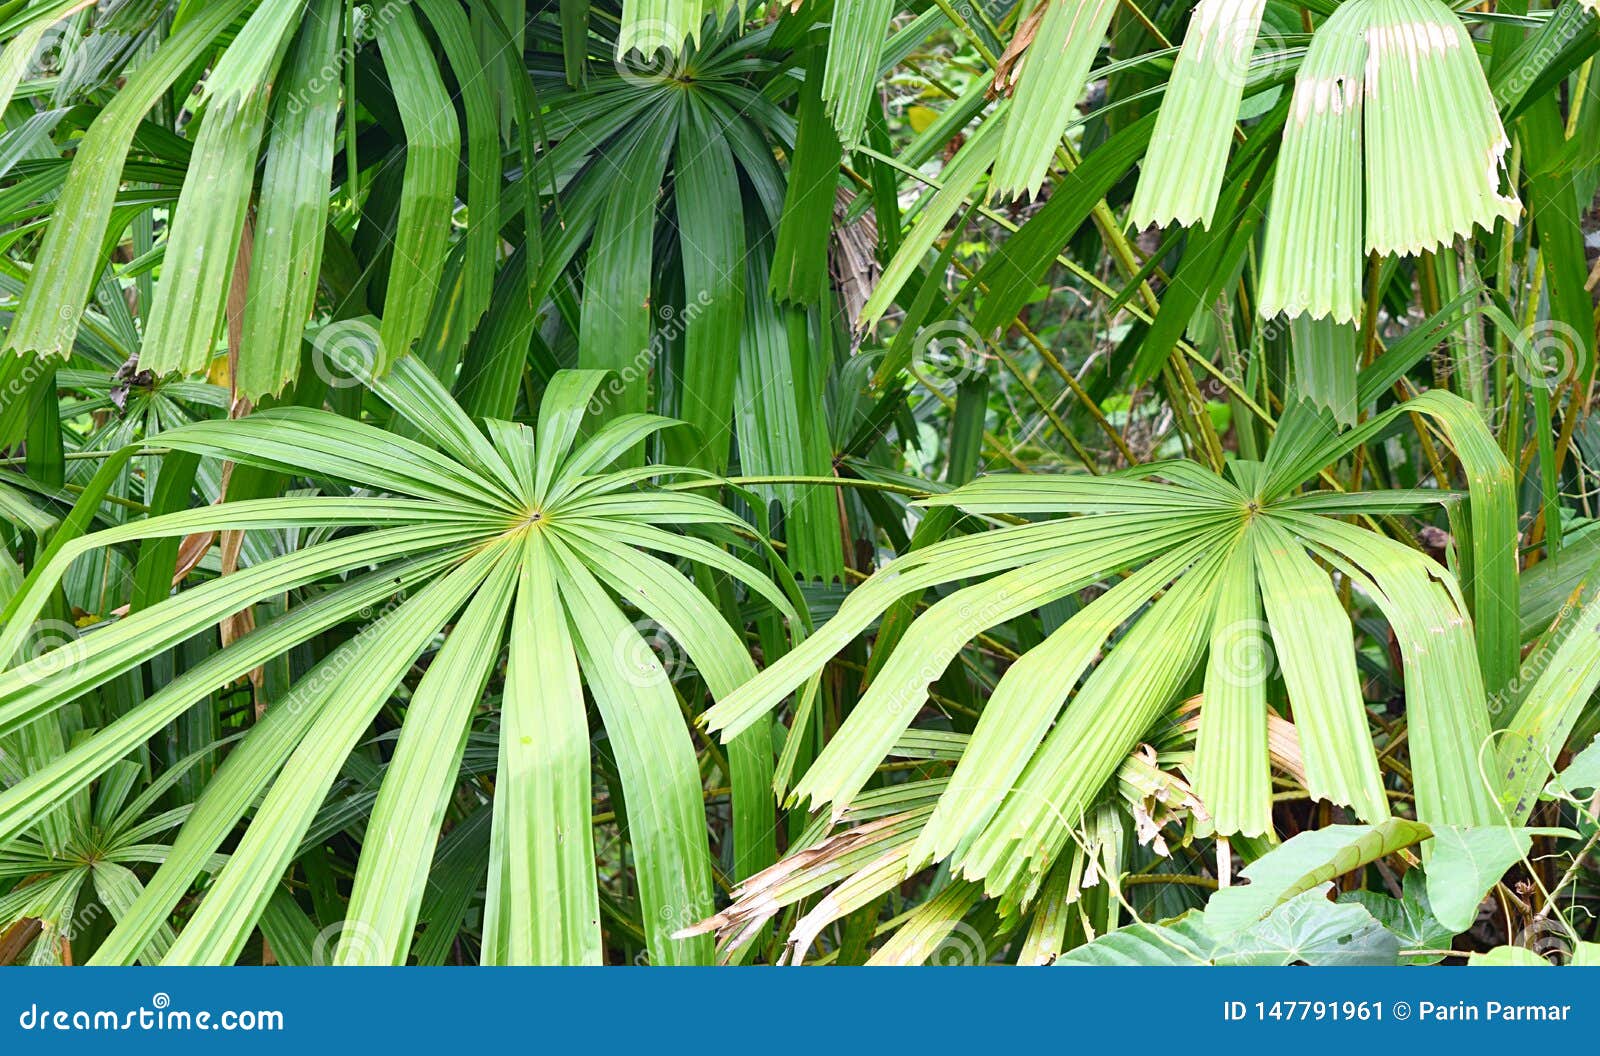 Mangrove Fan Palm Or Good Luck Palm Licuala Spinoa From Arecaceae Family Flora And Forest In Andaman Nicobar Islands India Stock Image Image Of Licuala Family